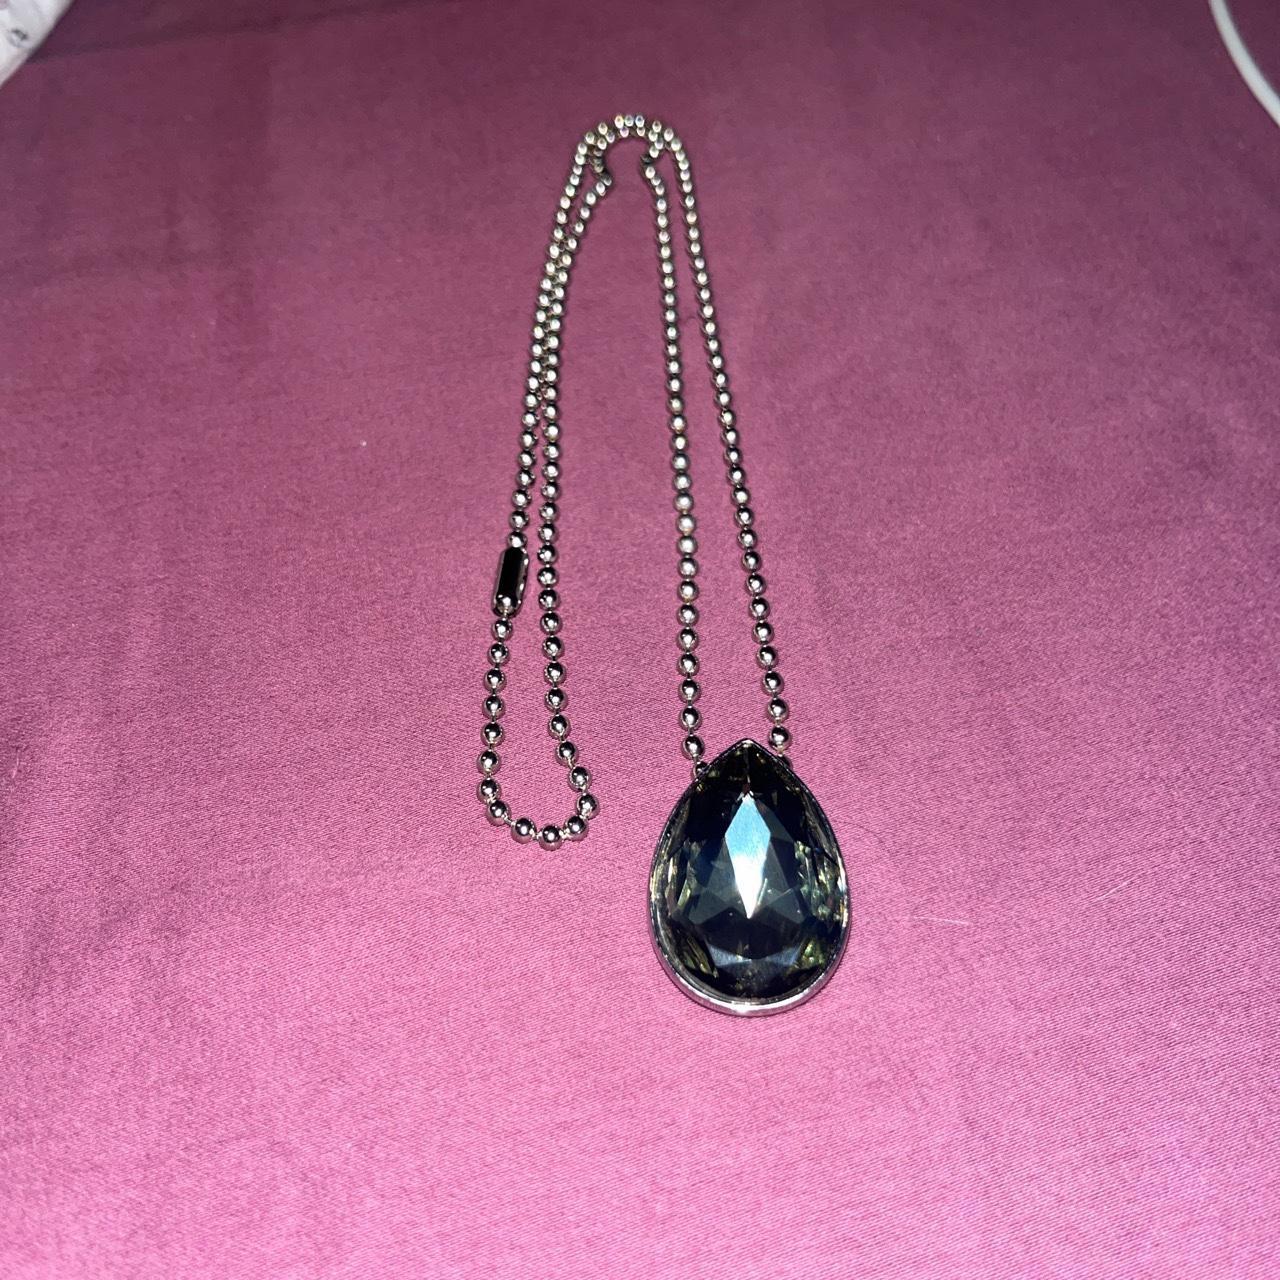 Crystal Cross Necklaces - BB Simon for Sale in Laguna Niguel, CA - OfferUp